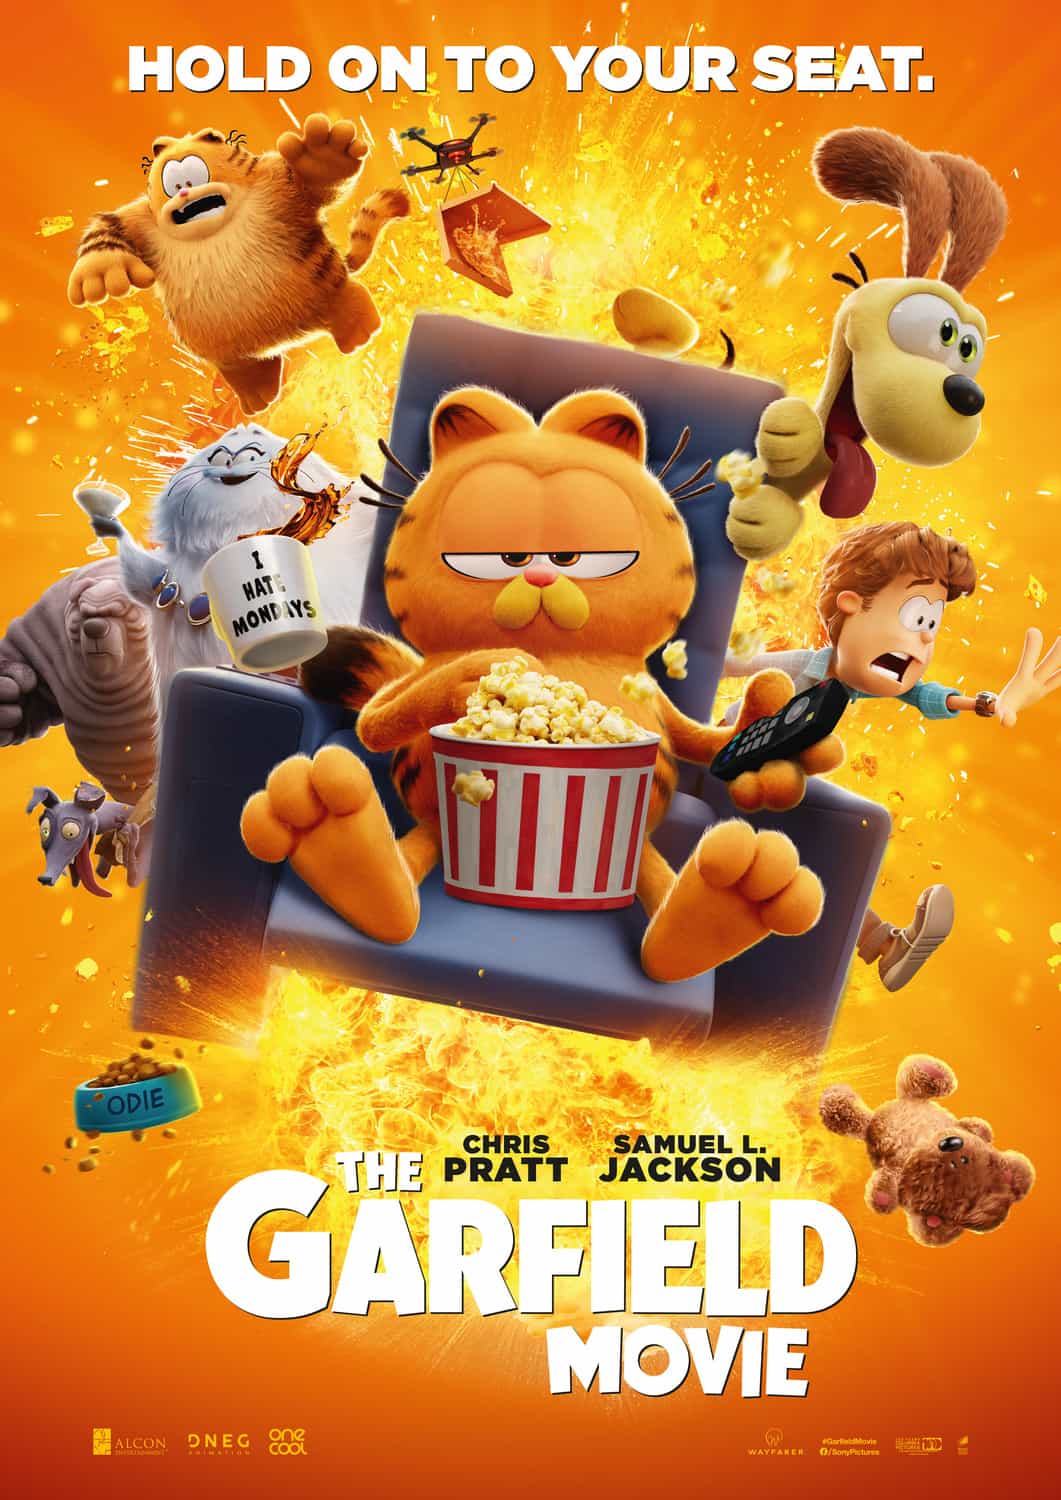 New poster has been released for The Garfield Movie which stars Chris Pratt and Samuel L. Jackson - movie UK release date 24th May 2024 #thegarfieldmovie